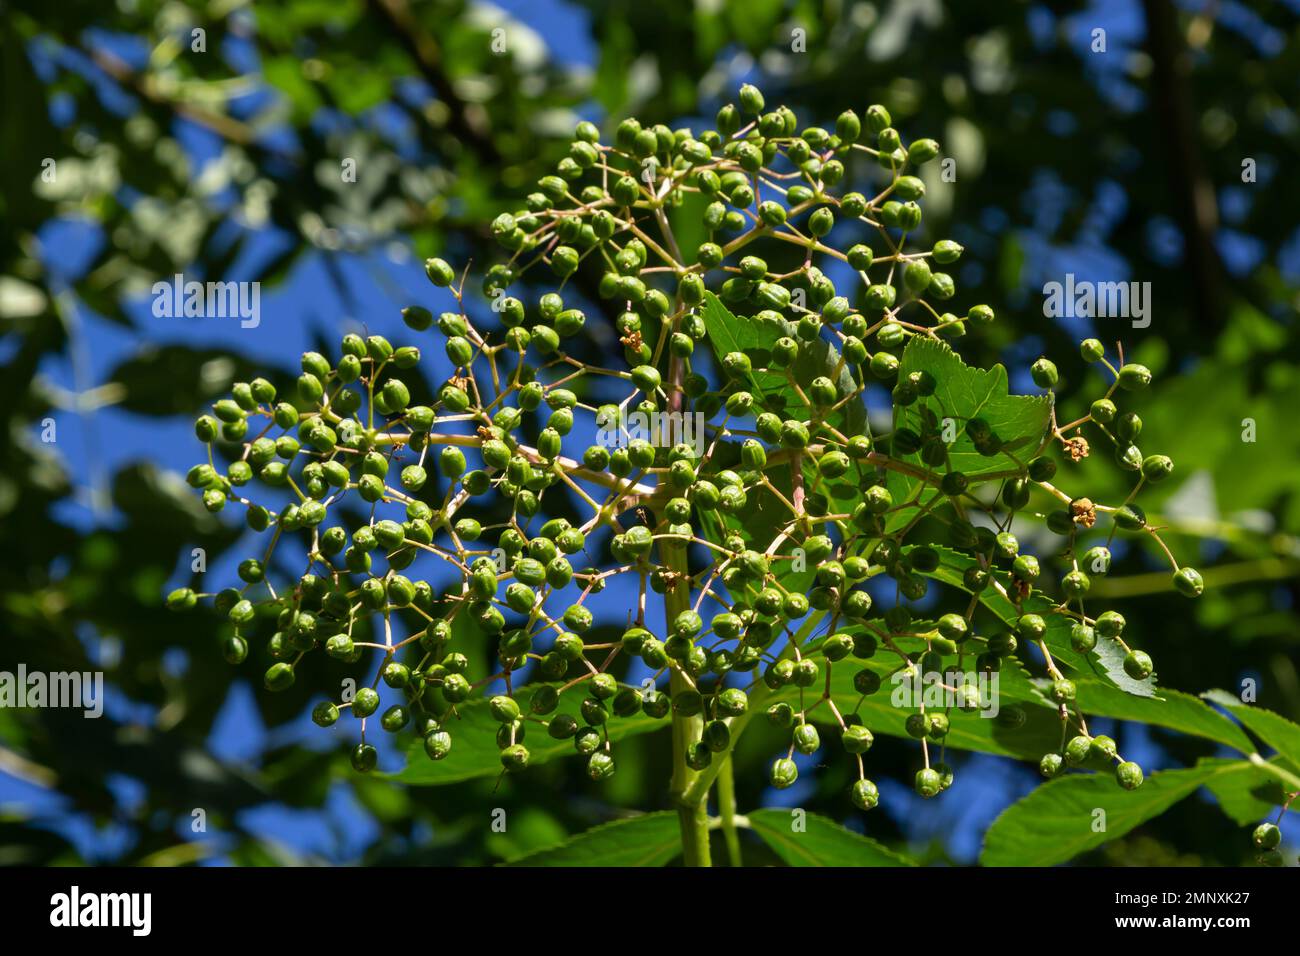 Flower buds and leaves of Black elderberry or Sambucus canadensis, in the garden. Stock Photo